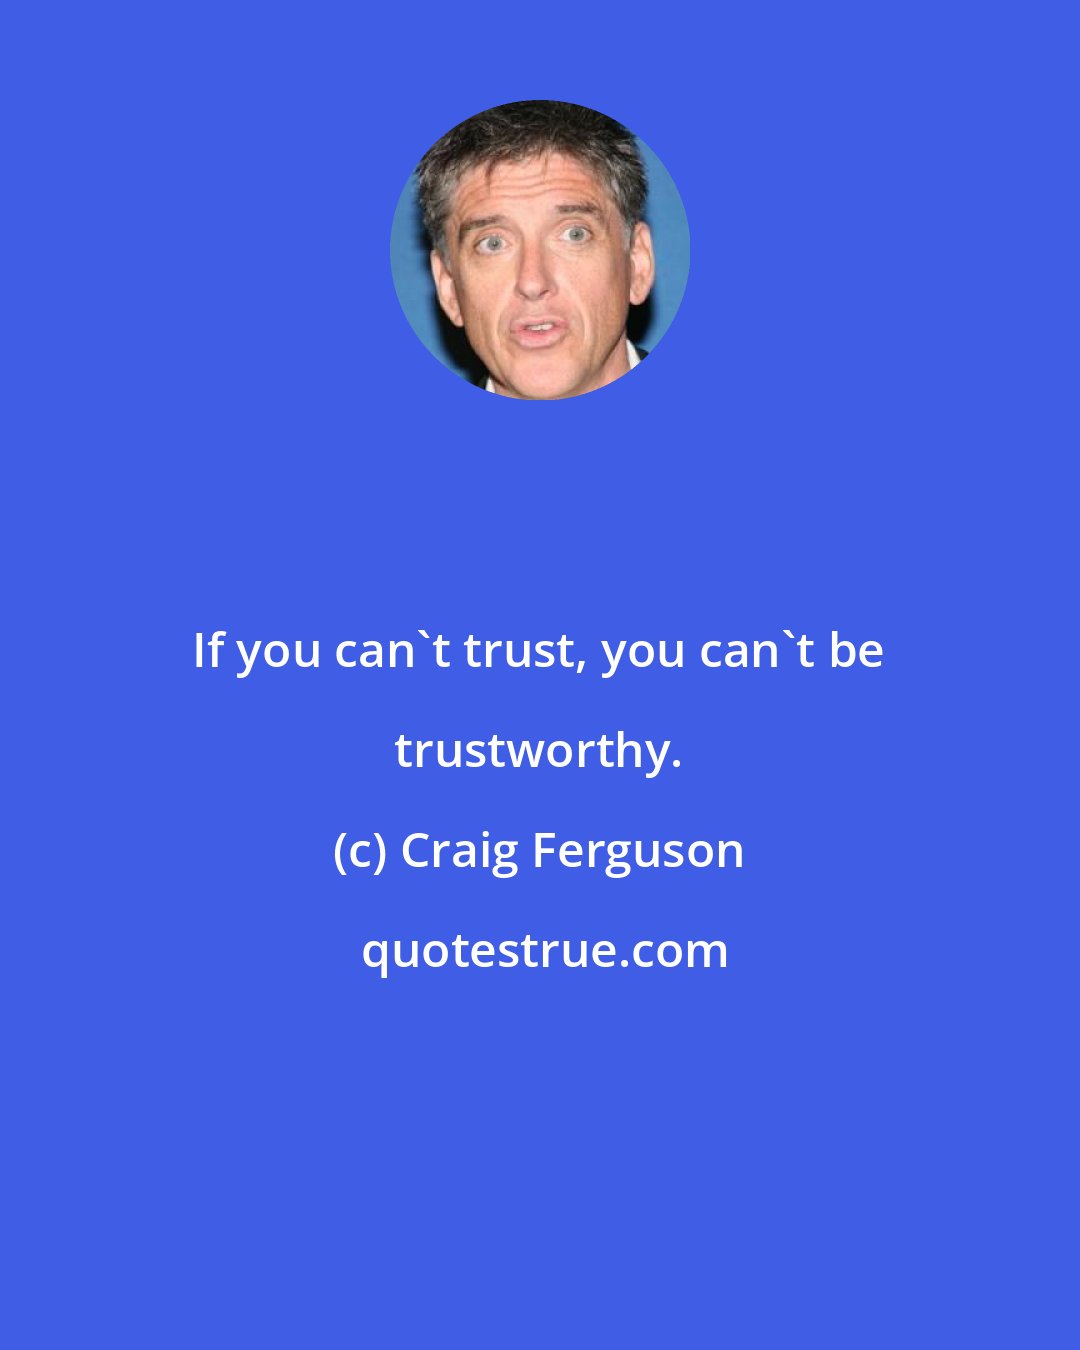 Craig Ferguson: If you can't trust, you can't be trustworthy.